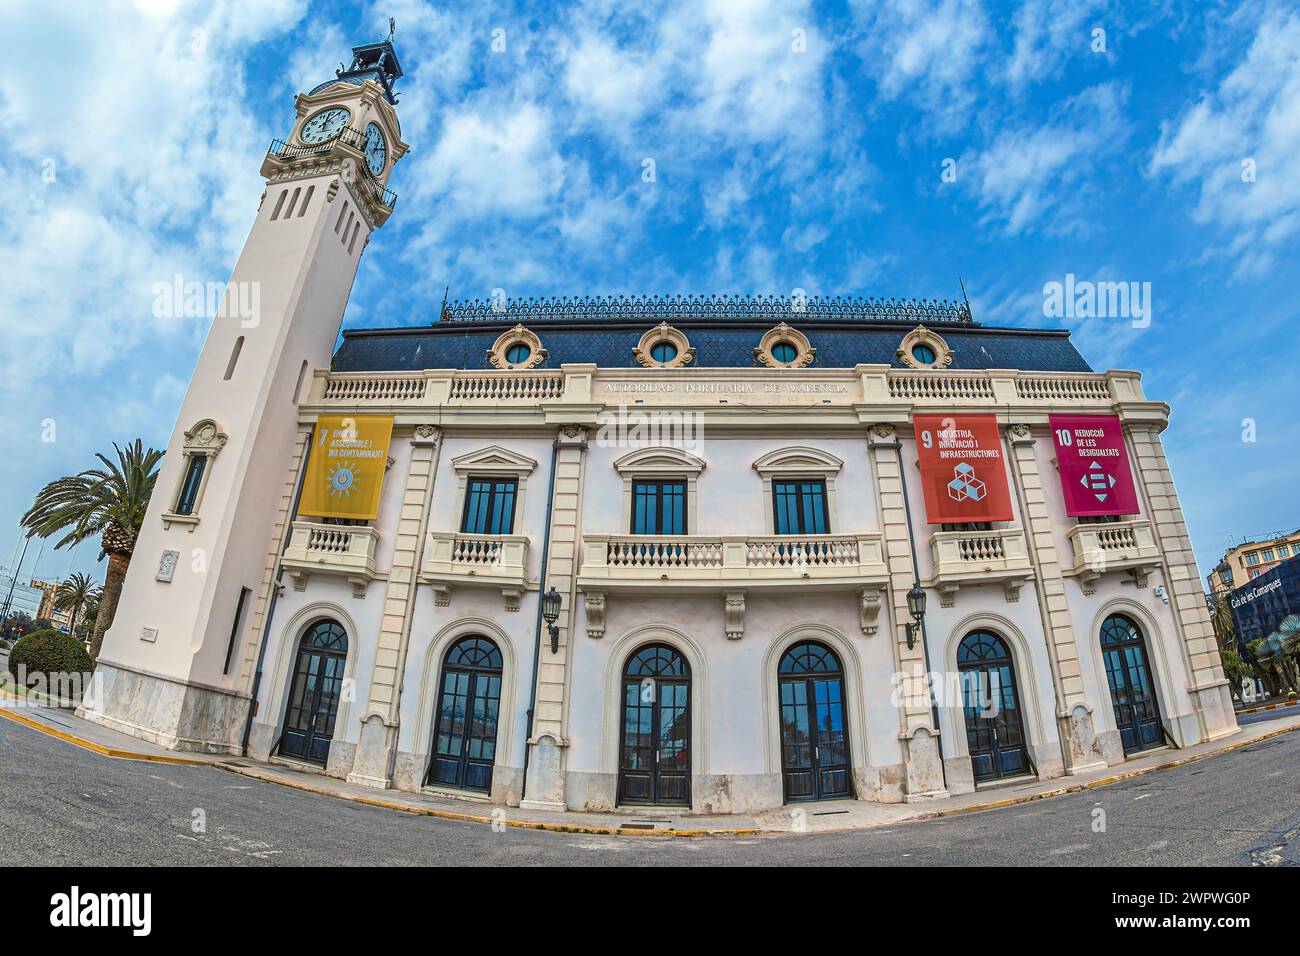 VALENCIA, SPAIN - MARCH 29, 2022: The Clock building or Edifici del Rellotge, a building from Muelle del Turía avenue, built in 1916, currently the he Stock Photo